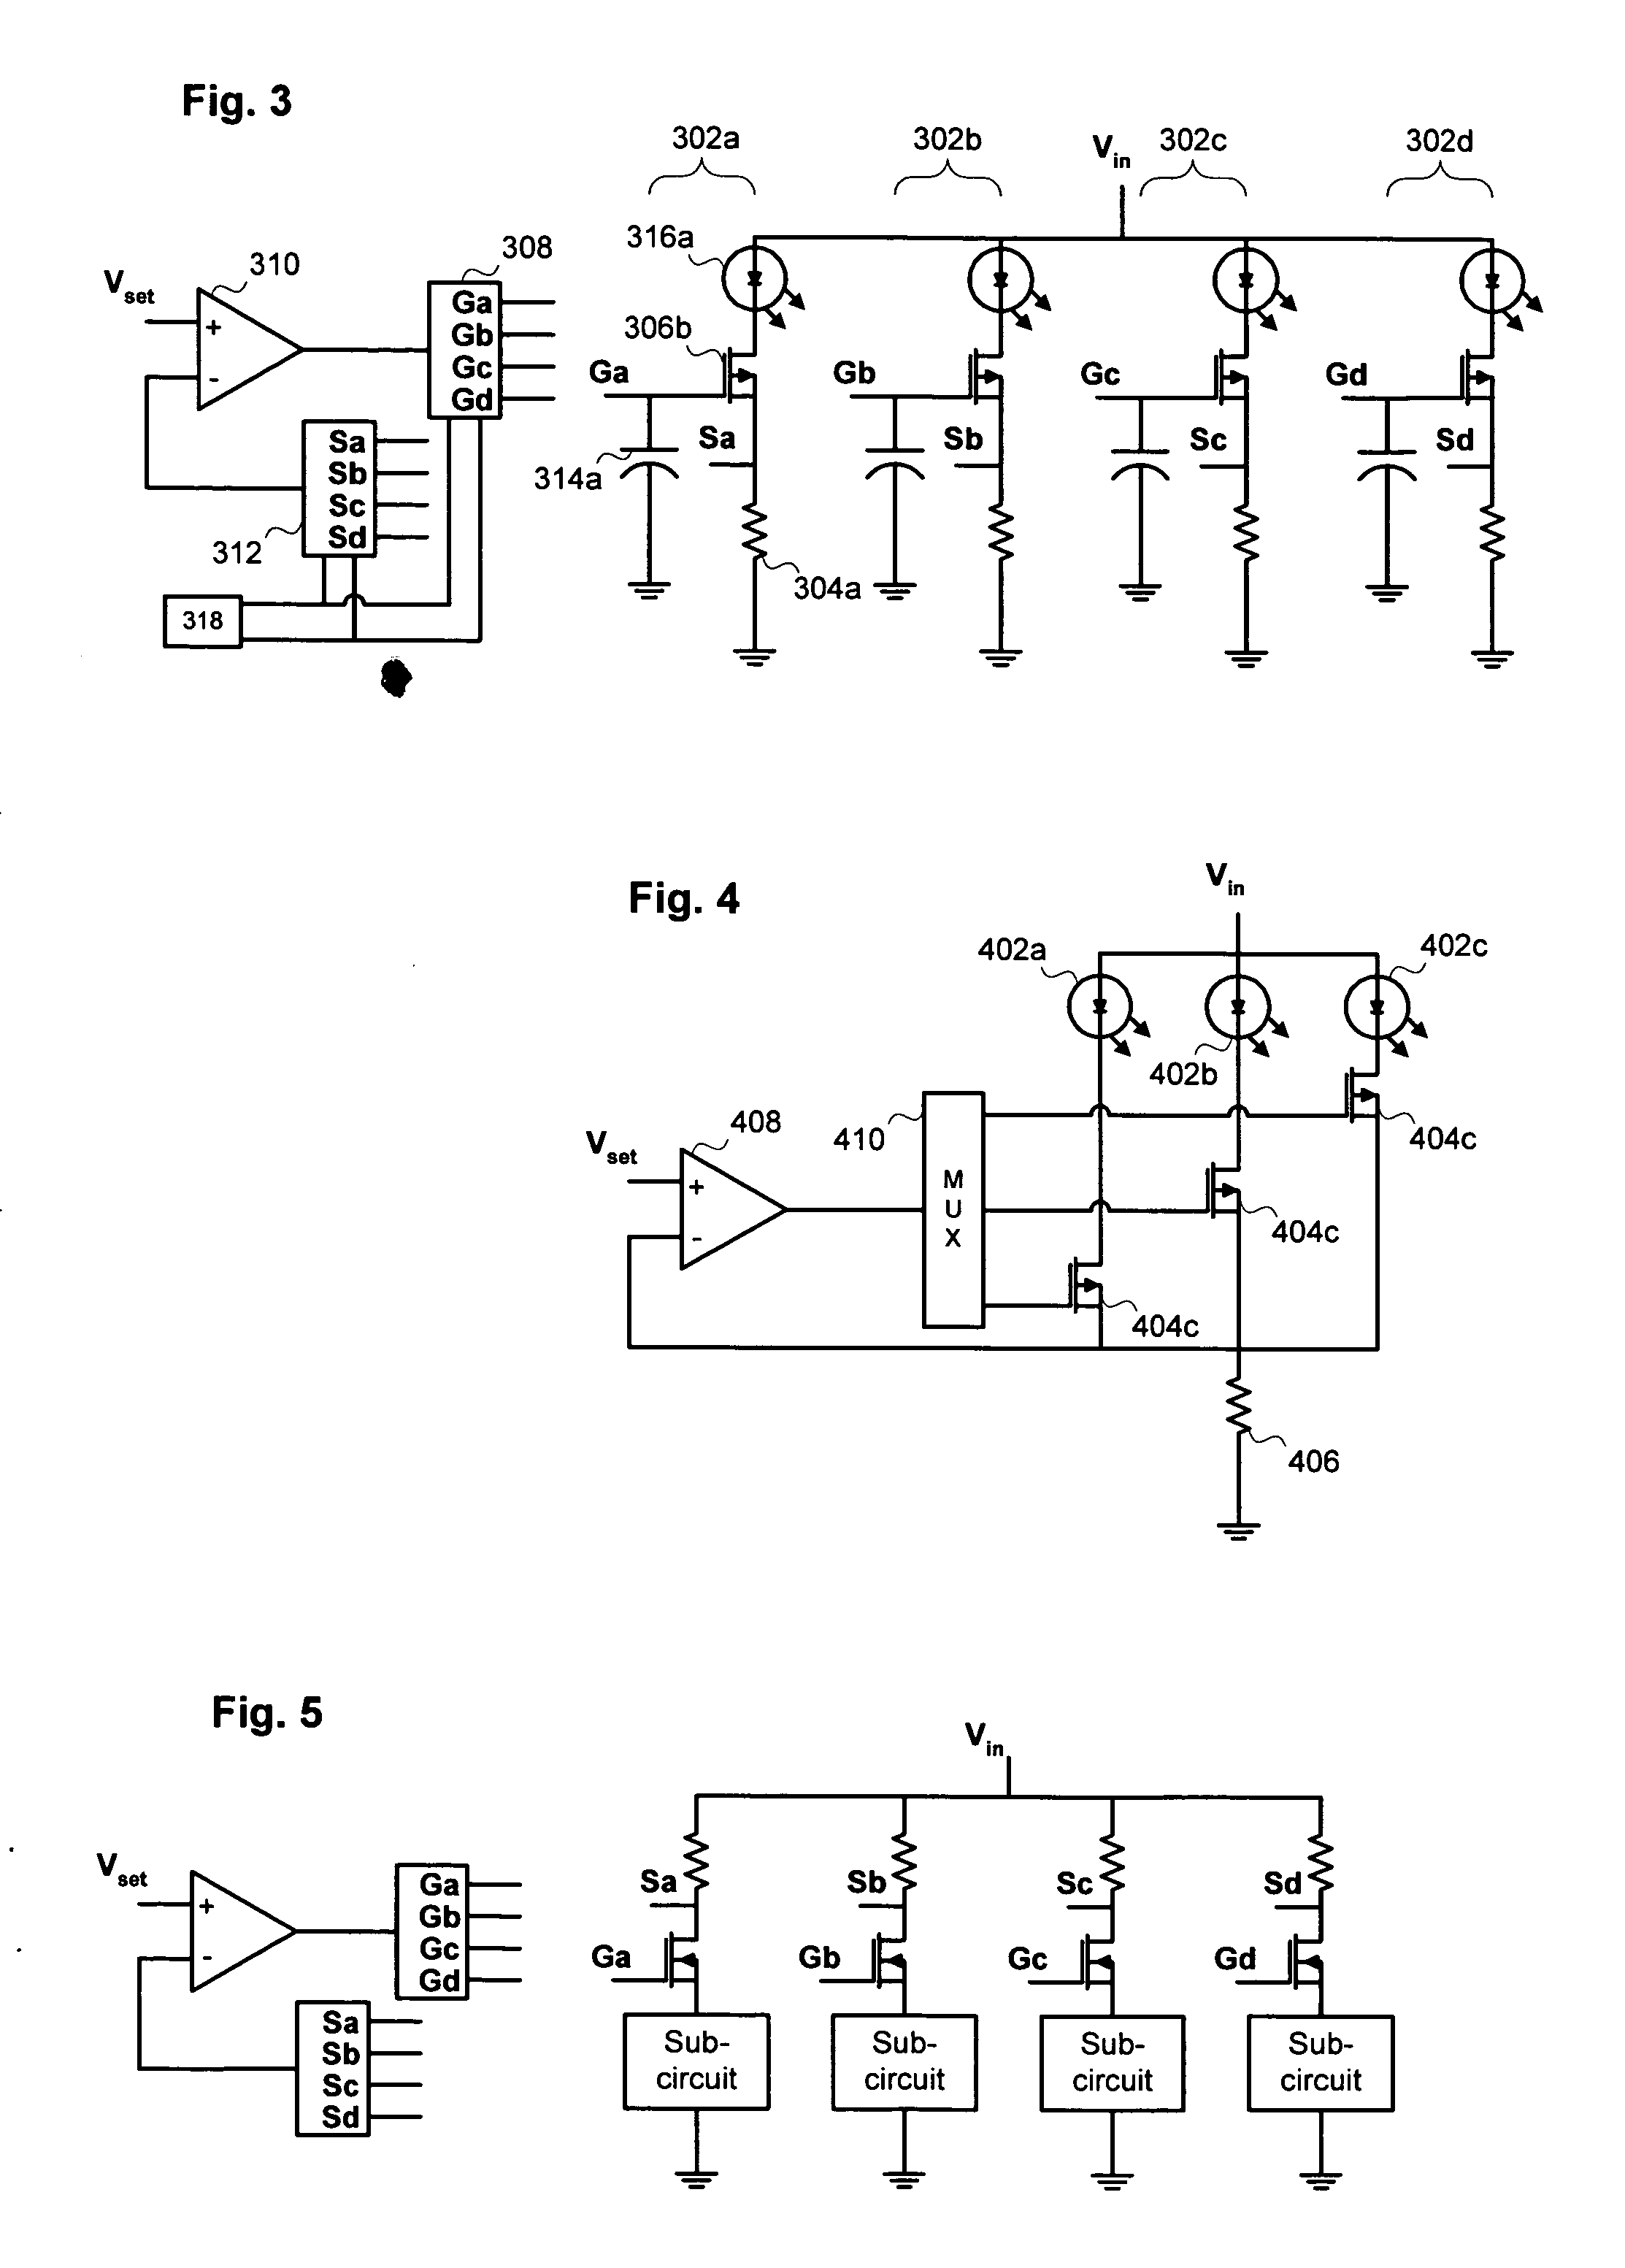 Single, multiplexed operational amplifier to improve current matching between channels